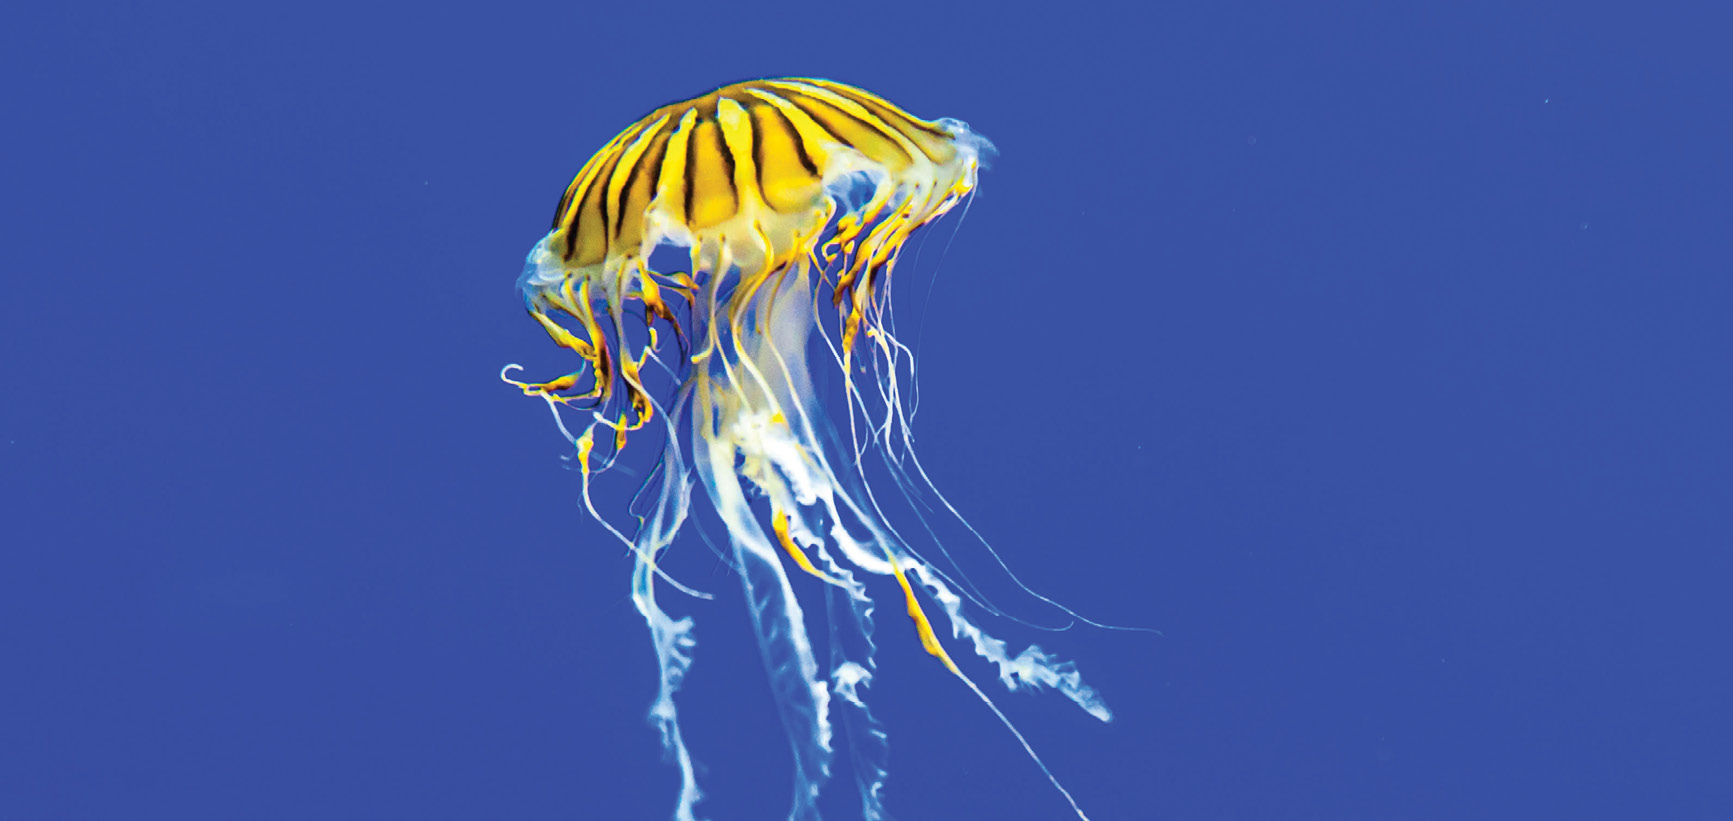 Jellyfish floats against blue background.